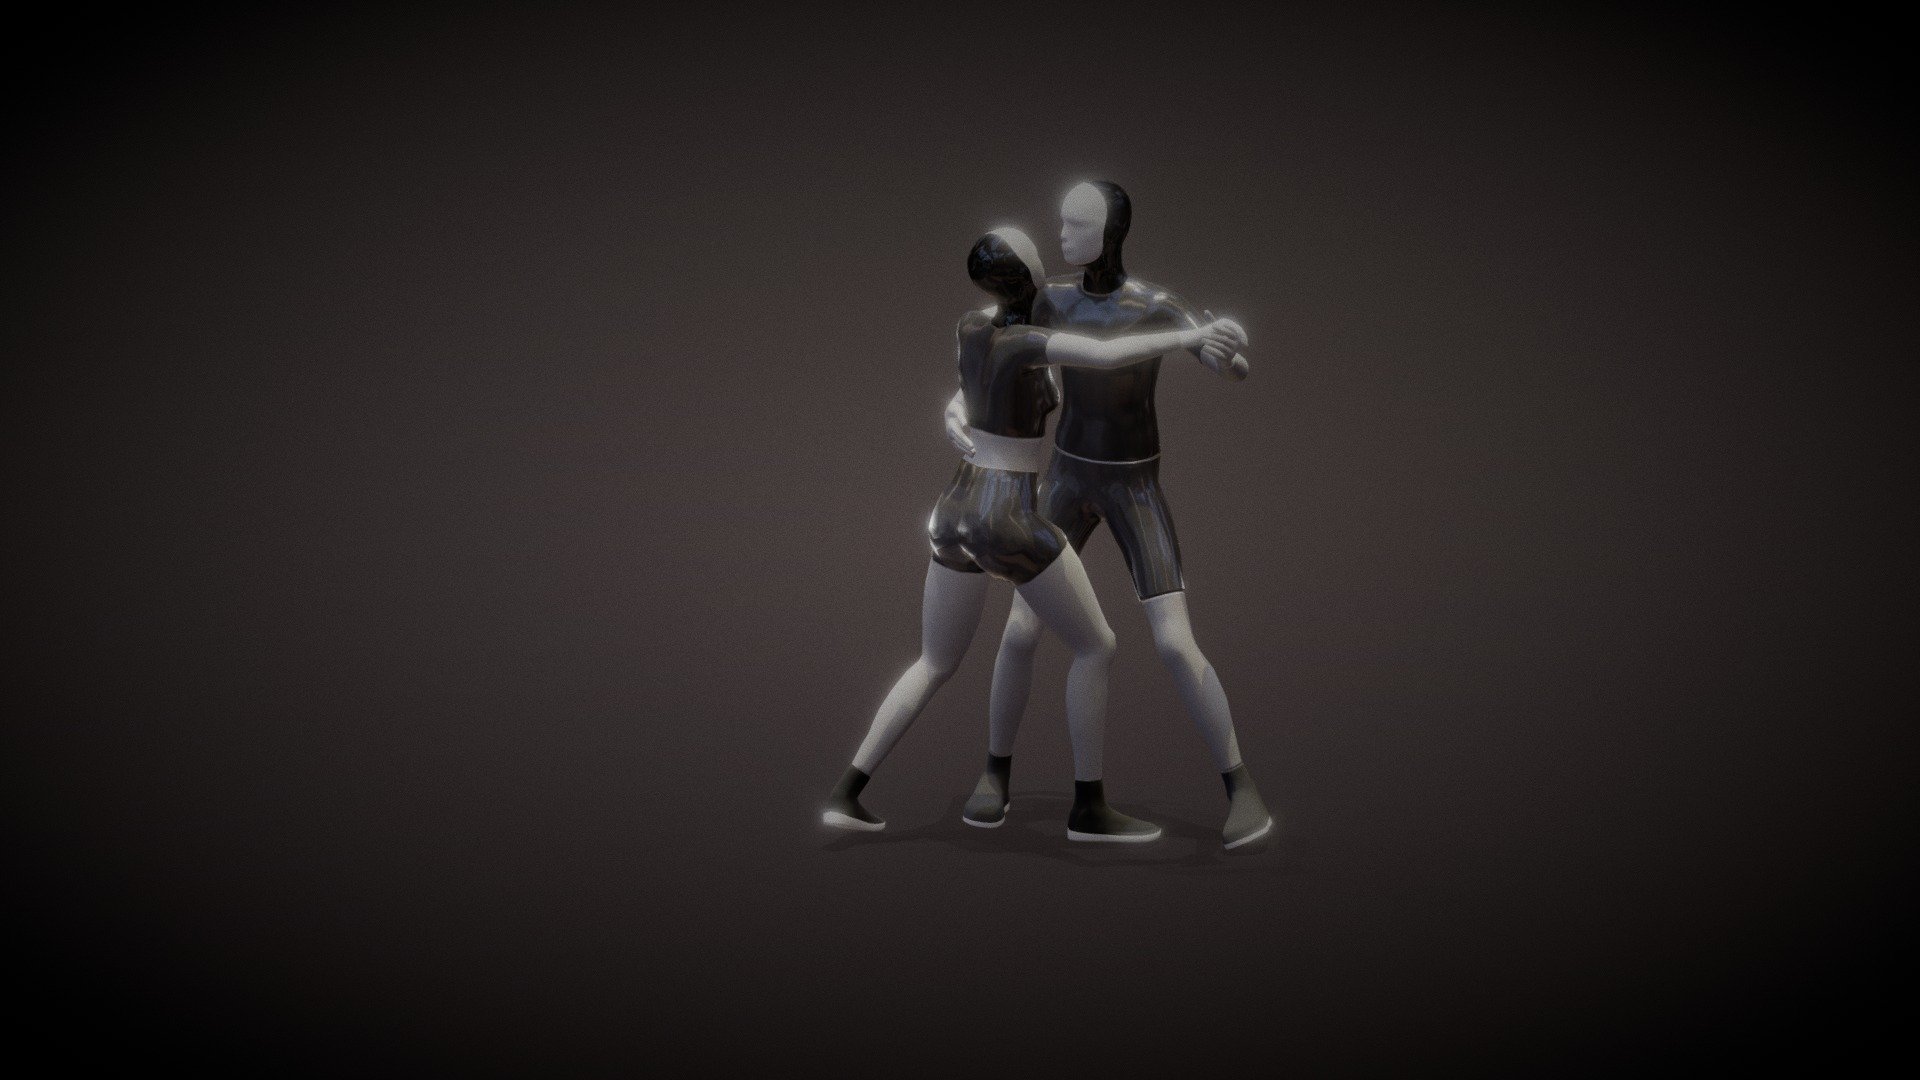 This is tech preview of the dance animation
.


Example of implementation: https://youtu.be/B_mG3wT3M6E
Pls, notice how the dance works in loop, hits the music beat and how realistic it is.

.

Information:




seamless loop

loop duration (at 60 fps) - 1473 frm (24.5 sec)

dance tempo - 60 bpm

.

This package consists next FBX files:
1) Male role
2) Female role
3) Assembles scene (example of correct usage)
4) T-pose M
5) T-pose F
.




The animations of M/F roles are separated by 2 files to keep correct bones namings.

In the Assembled Scene - bones are renamed (M:/F: prefixes in the beginning) - just to fit 2 characters into 1 scene.


The characters bones are named according to UE5 naming convention.




the FBX files are saved in MotionBuilder 2013 version format



the characters are fully MB Characterized (in T-pose) and ready for Control Rig editing and/or re-targeting

in all A&amp;M cooperative dances (M-F / F-M-F) the Female base model is scaled up to 1.01 value to harmonize F-M relative heights)
 - A&M: Just Waltz (60 bpm): couple dance animation - Buy Royalty Free 3D model by MocapDancer 3d model